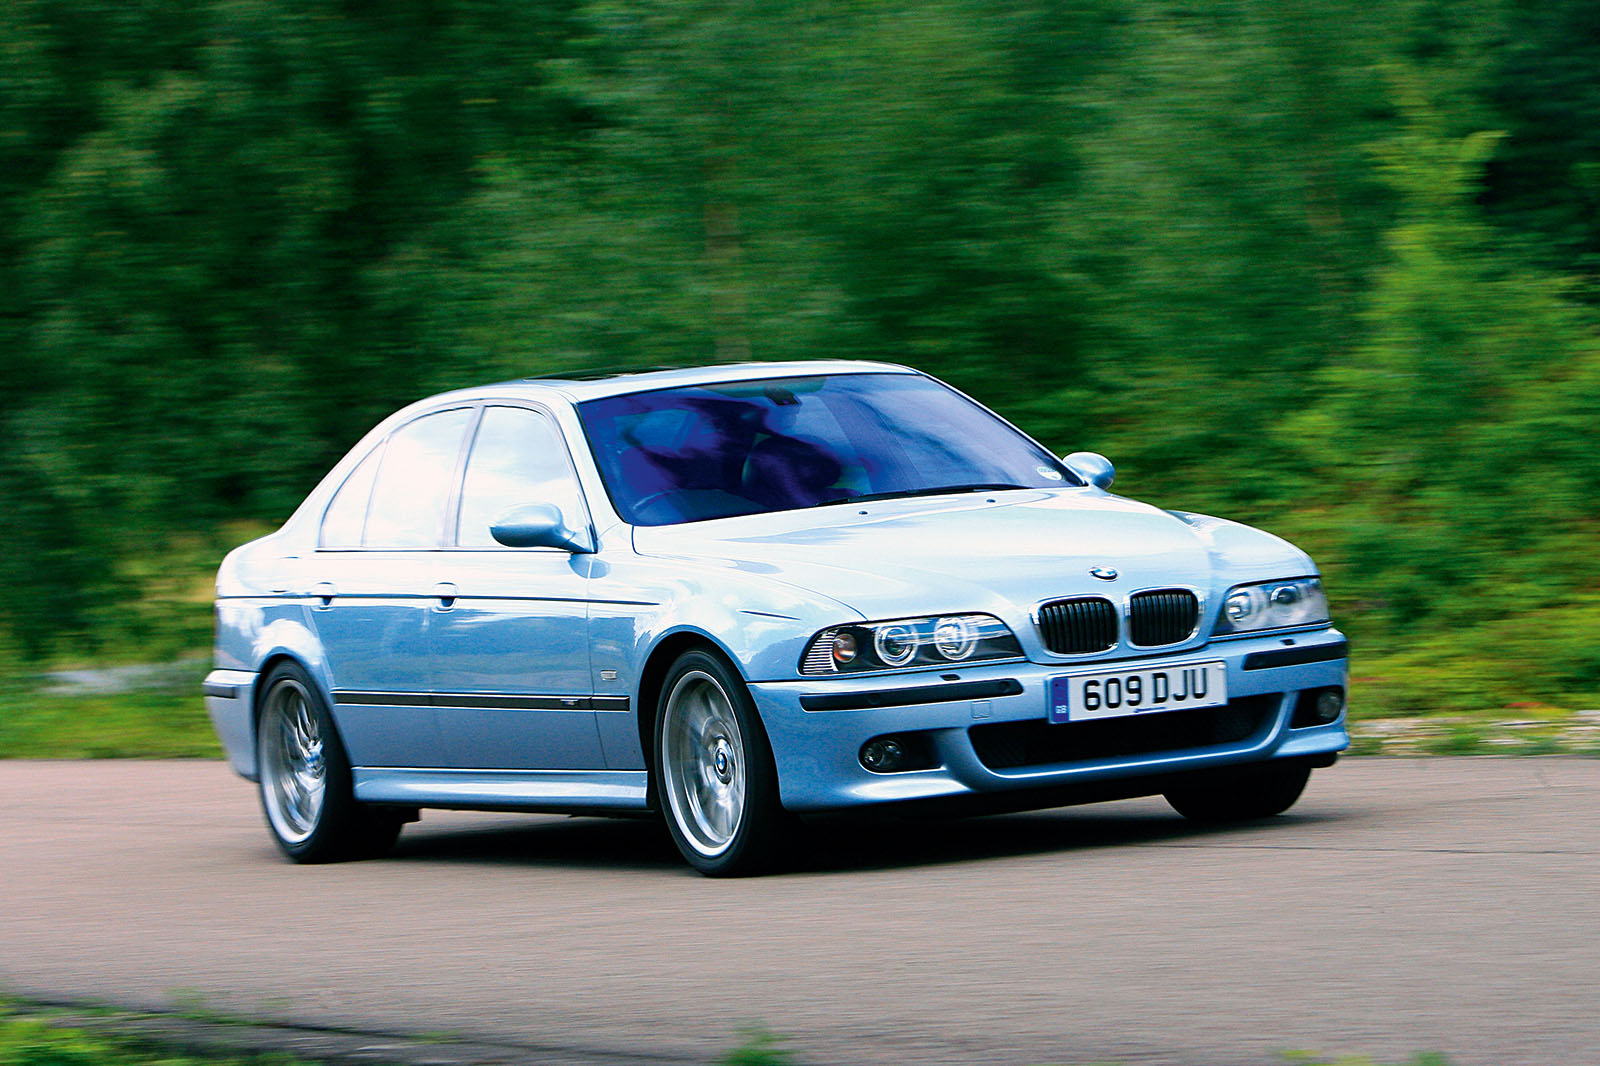 The Ultimate Guide to the 1998-2003 E39 BMW M5: Bimmer Power Unleashed